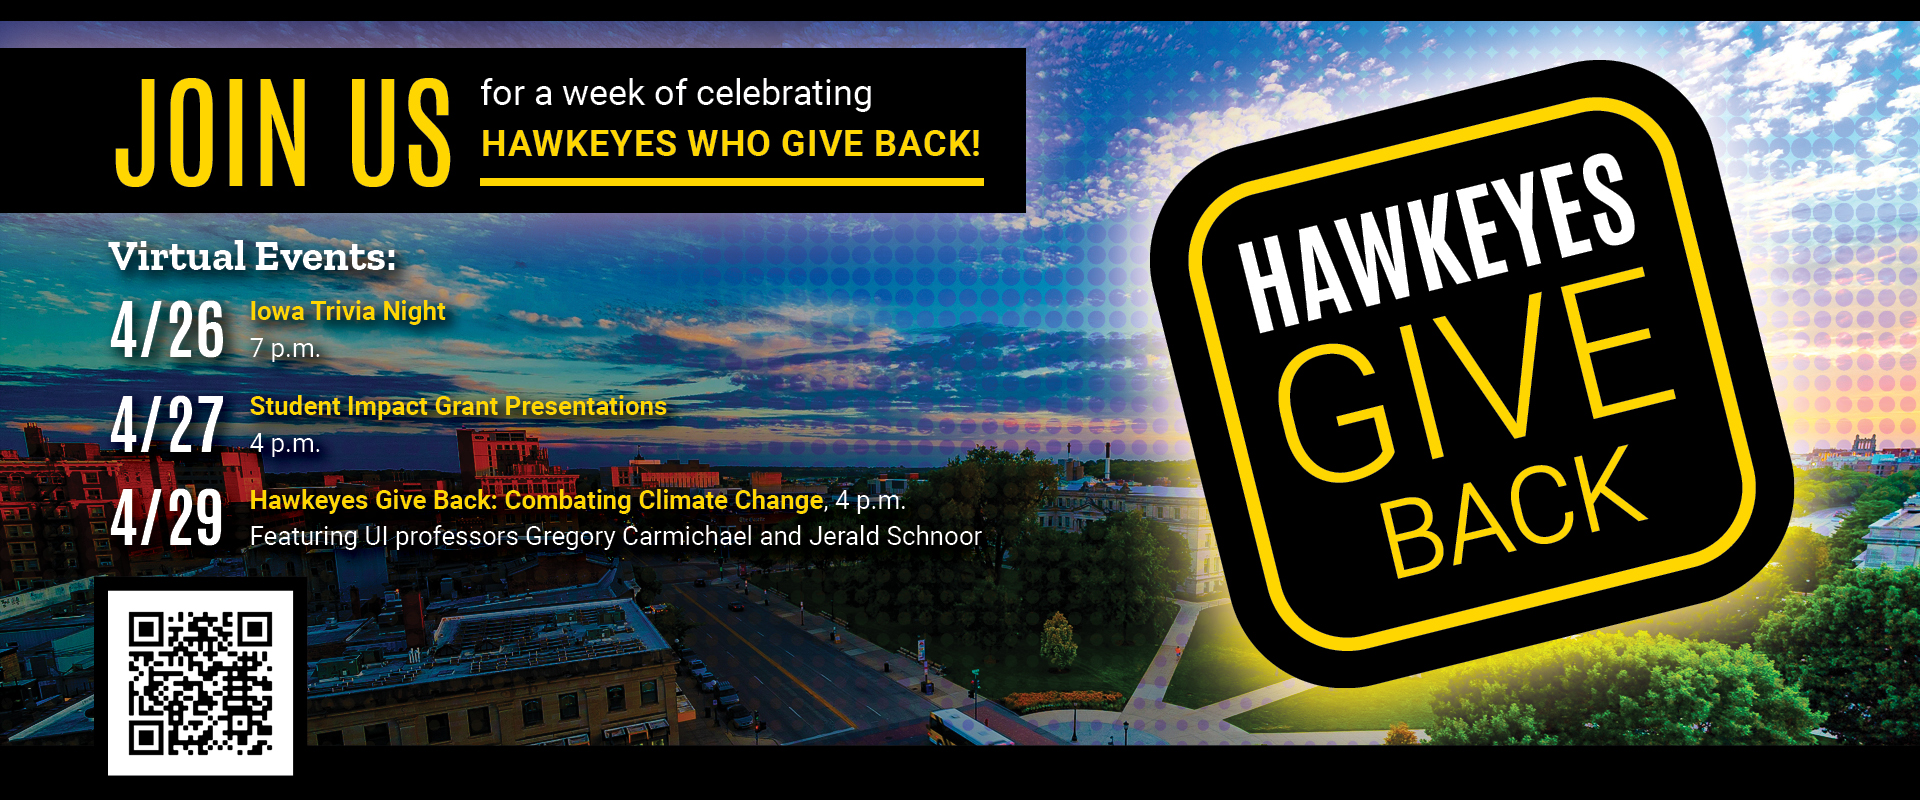 Hawkeyes Give Back Talk: Combating Climate Change